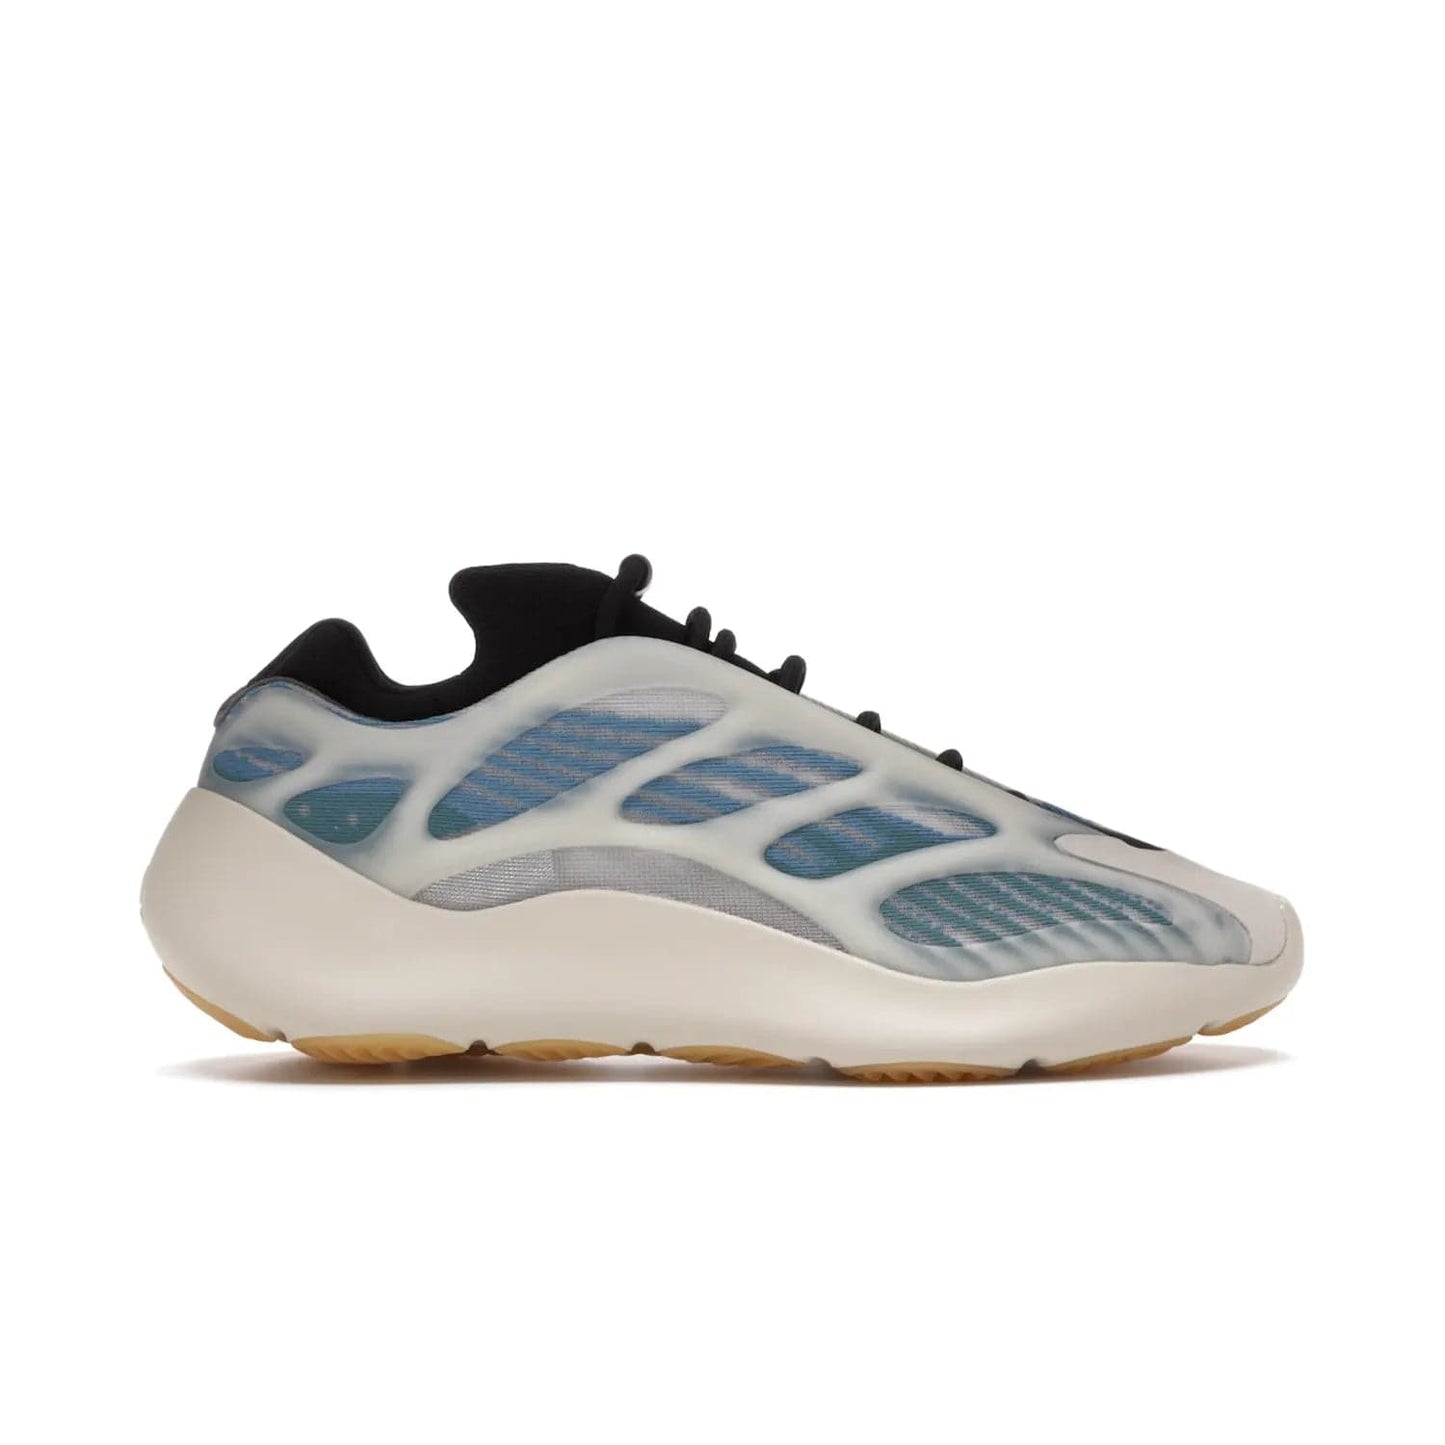 adidas Yeezy 700 V3 Kyanite - Image 1 - Only at www.BallersClubKickz.com - The adidas Yeezy 700 V3 Kyanite offers a layered design featuring a glow-in-the-dark TPU cage and a tonal cream-colored EVA foam midsole. With its herringbone-patterned outsole, the style and comfort of the sneaker will accompany you anywhere. Released in March 2021, it's a great addition to any sneaker wardrobe.